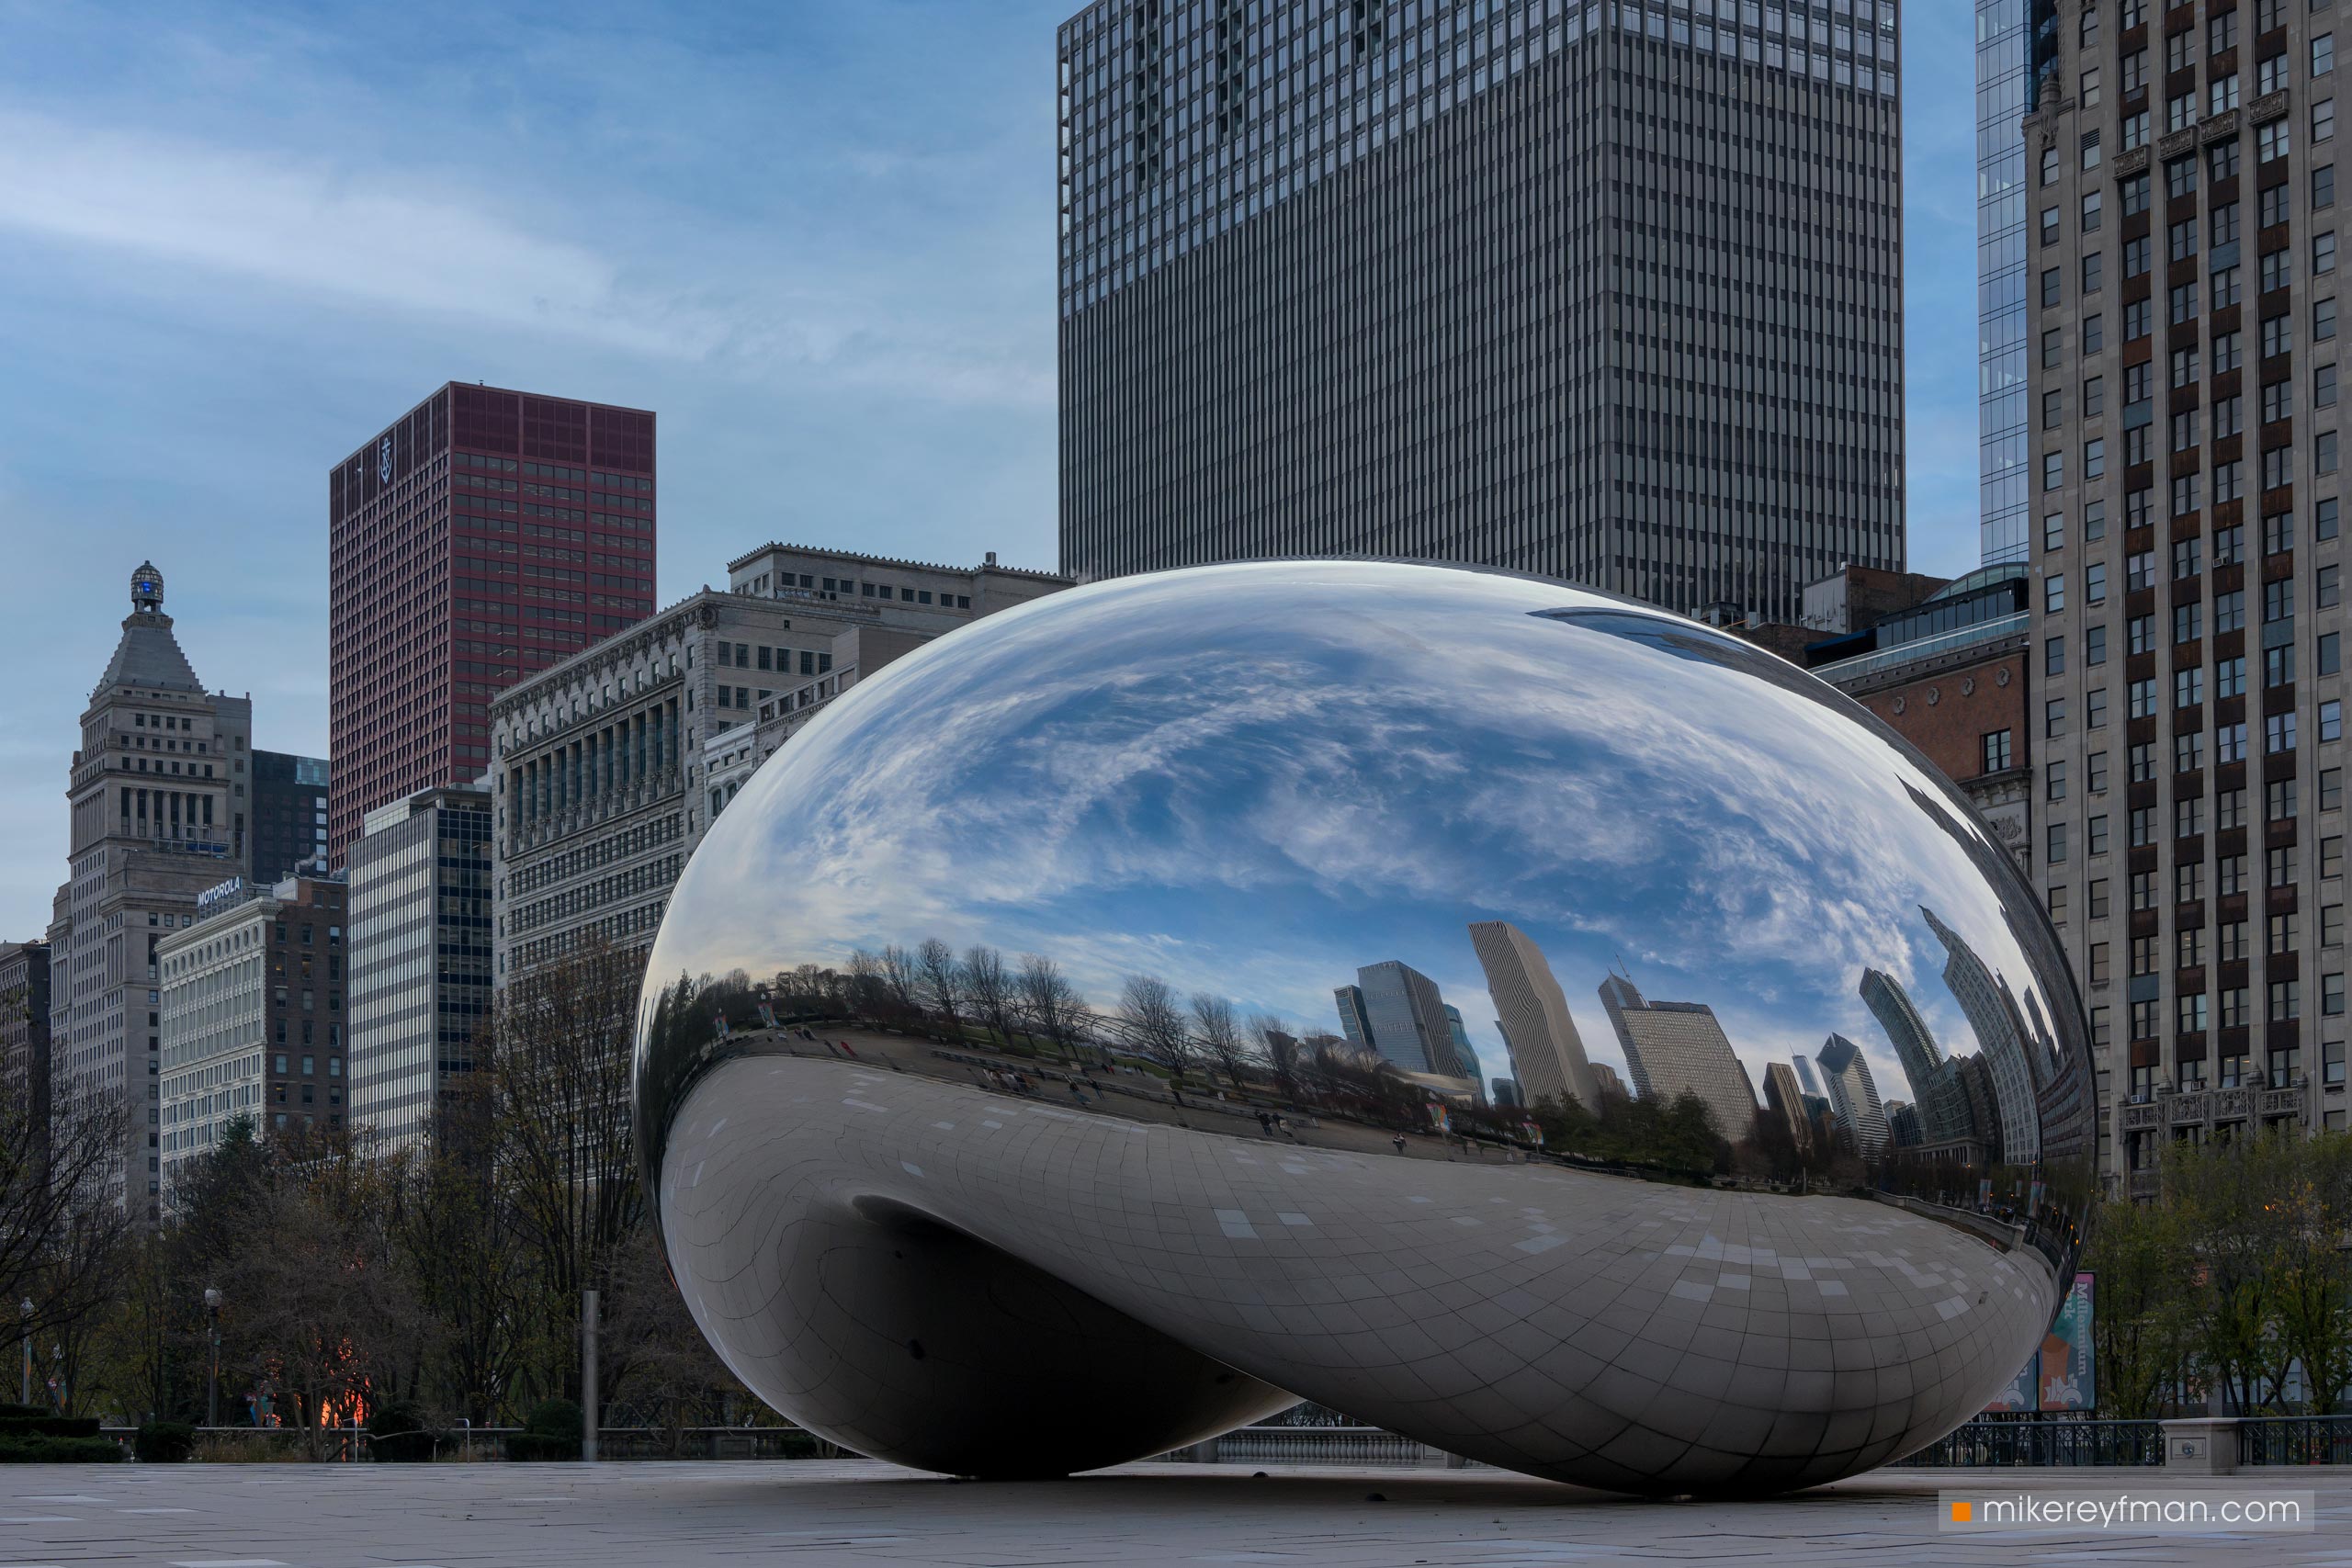 The Cloud Gate, also known as the Bean, at Millenium Park, Chicago, Illinois, USA. 080-CH-2_ZRA8550 - Ever-beating architectural heart of America. The birthplace of the most iconic buildings in the country. - Mike Reyfman Photography